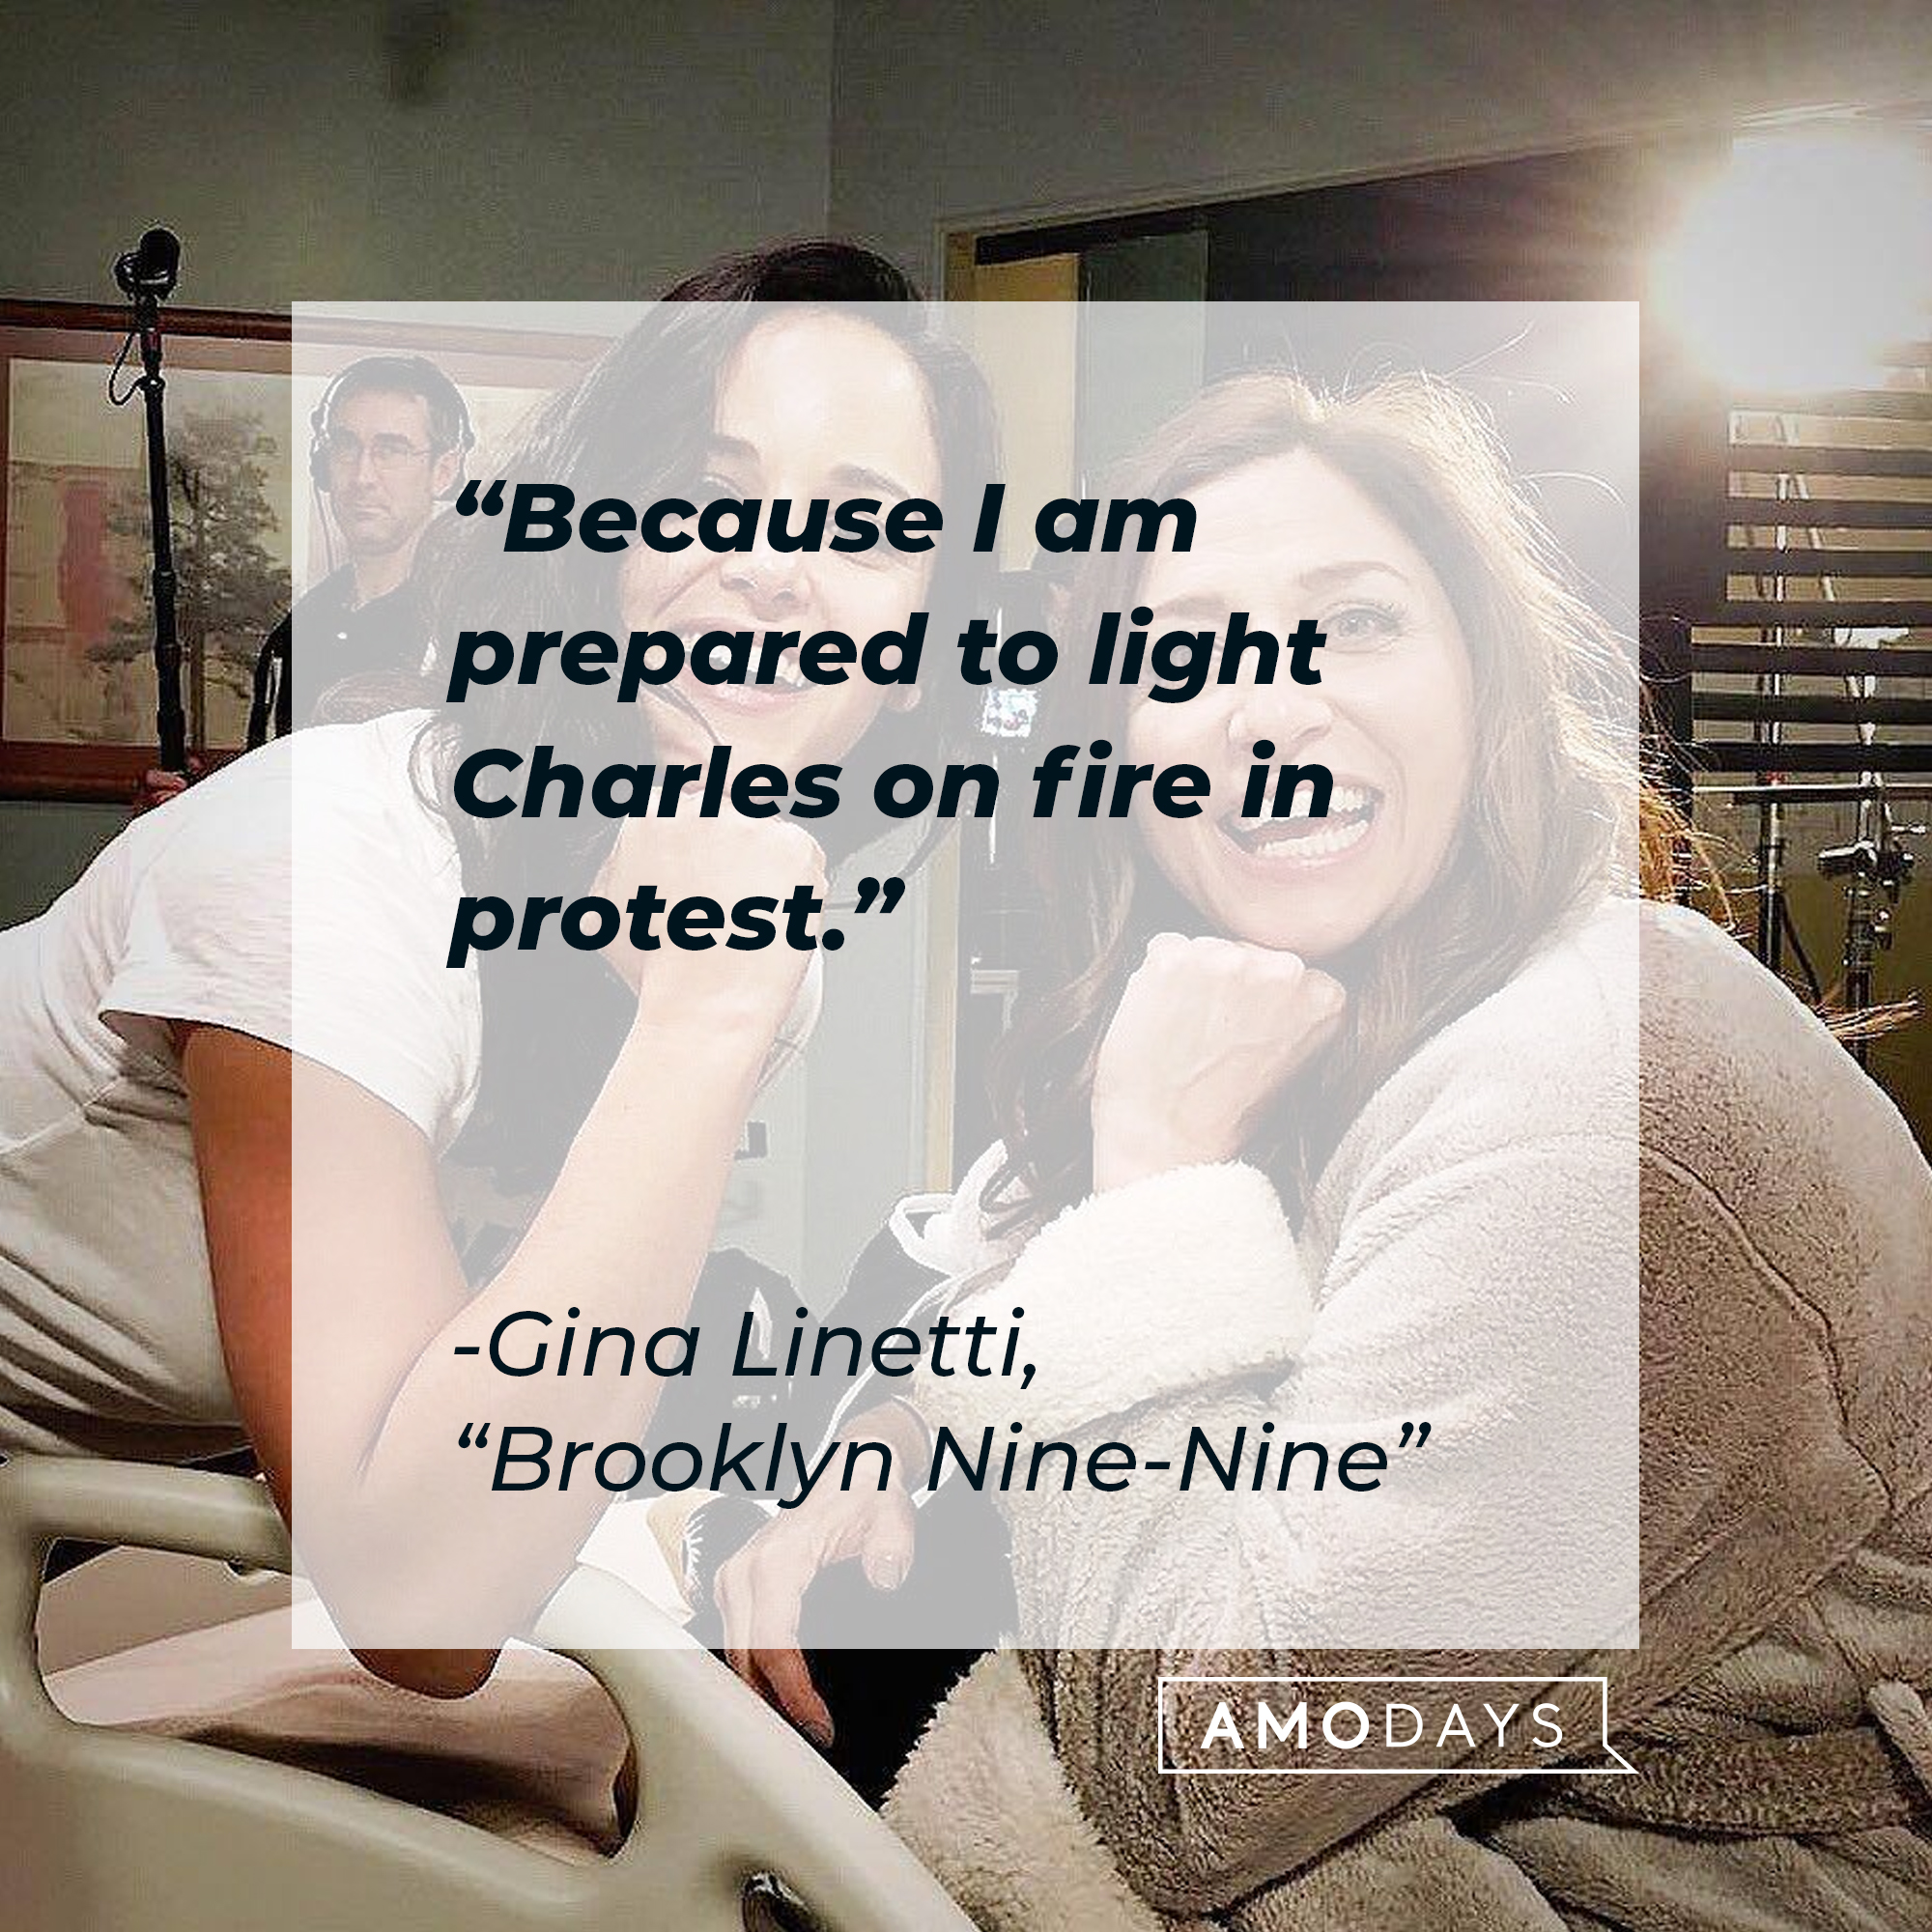 Gina Linetti with her quote: "Because I am prepared to light Charles on fire in protest." | Source: Facebook.com/BrooklynNineNine